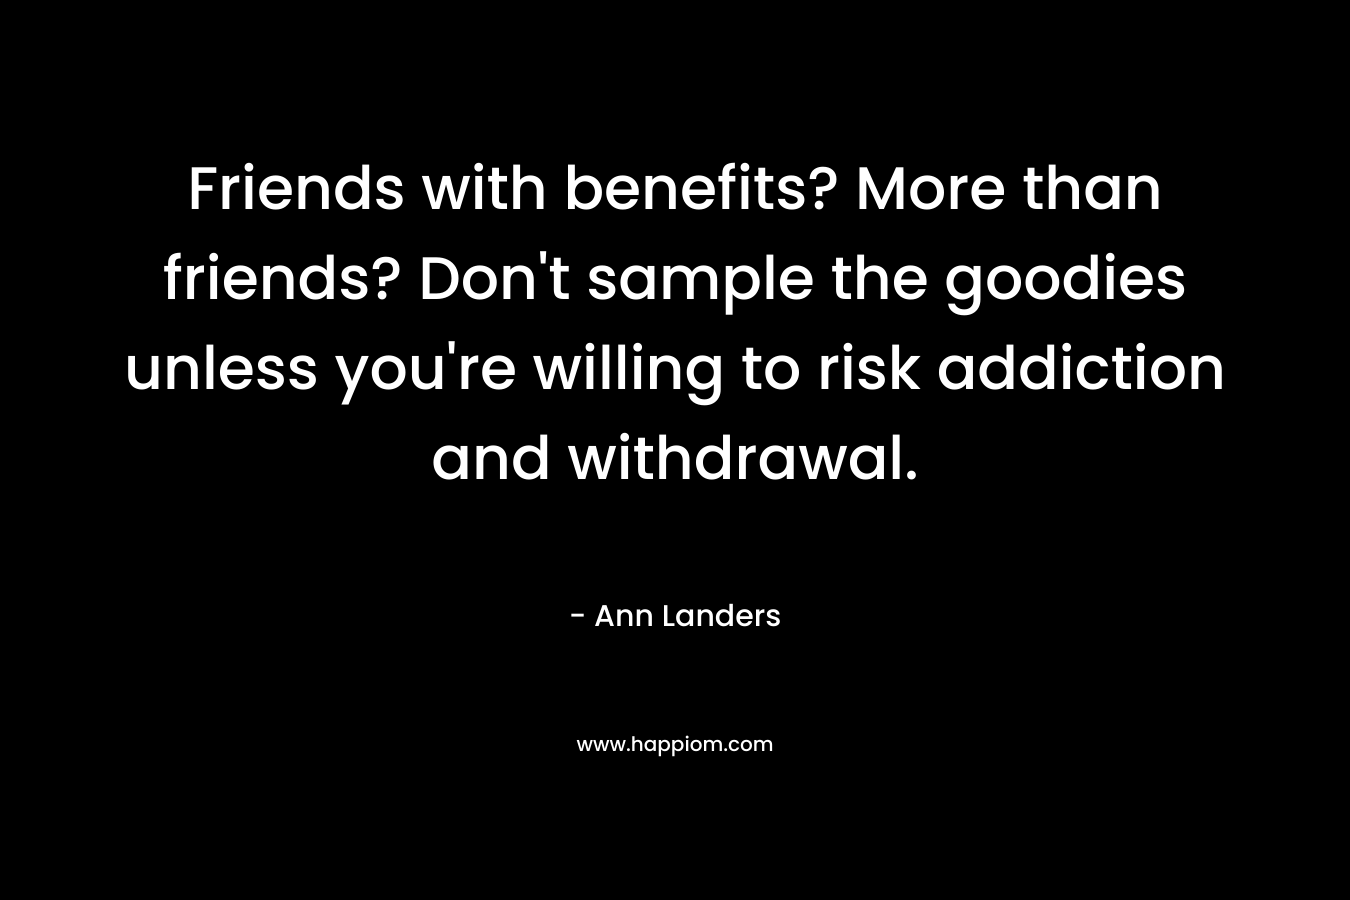 Friends with benefits? More than friends? Don't sample the goodies unless you're willing to risk addiction and withdrawal.